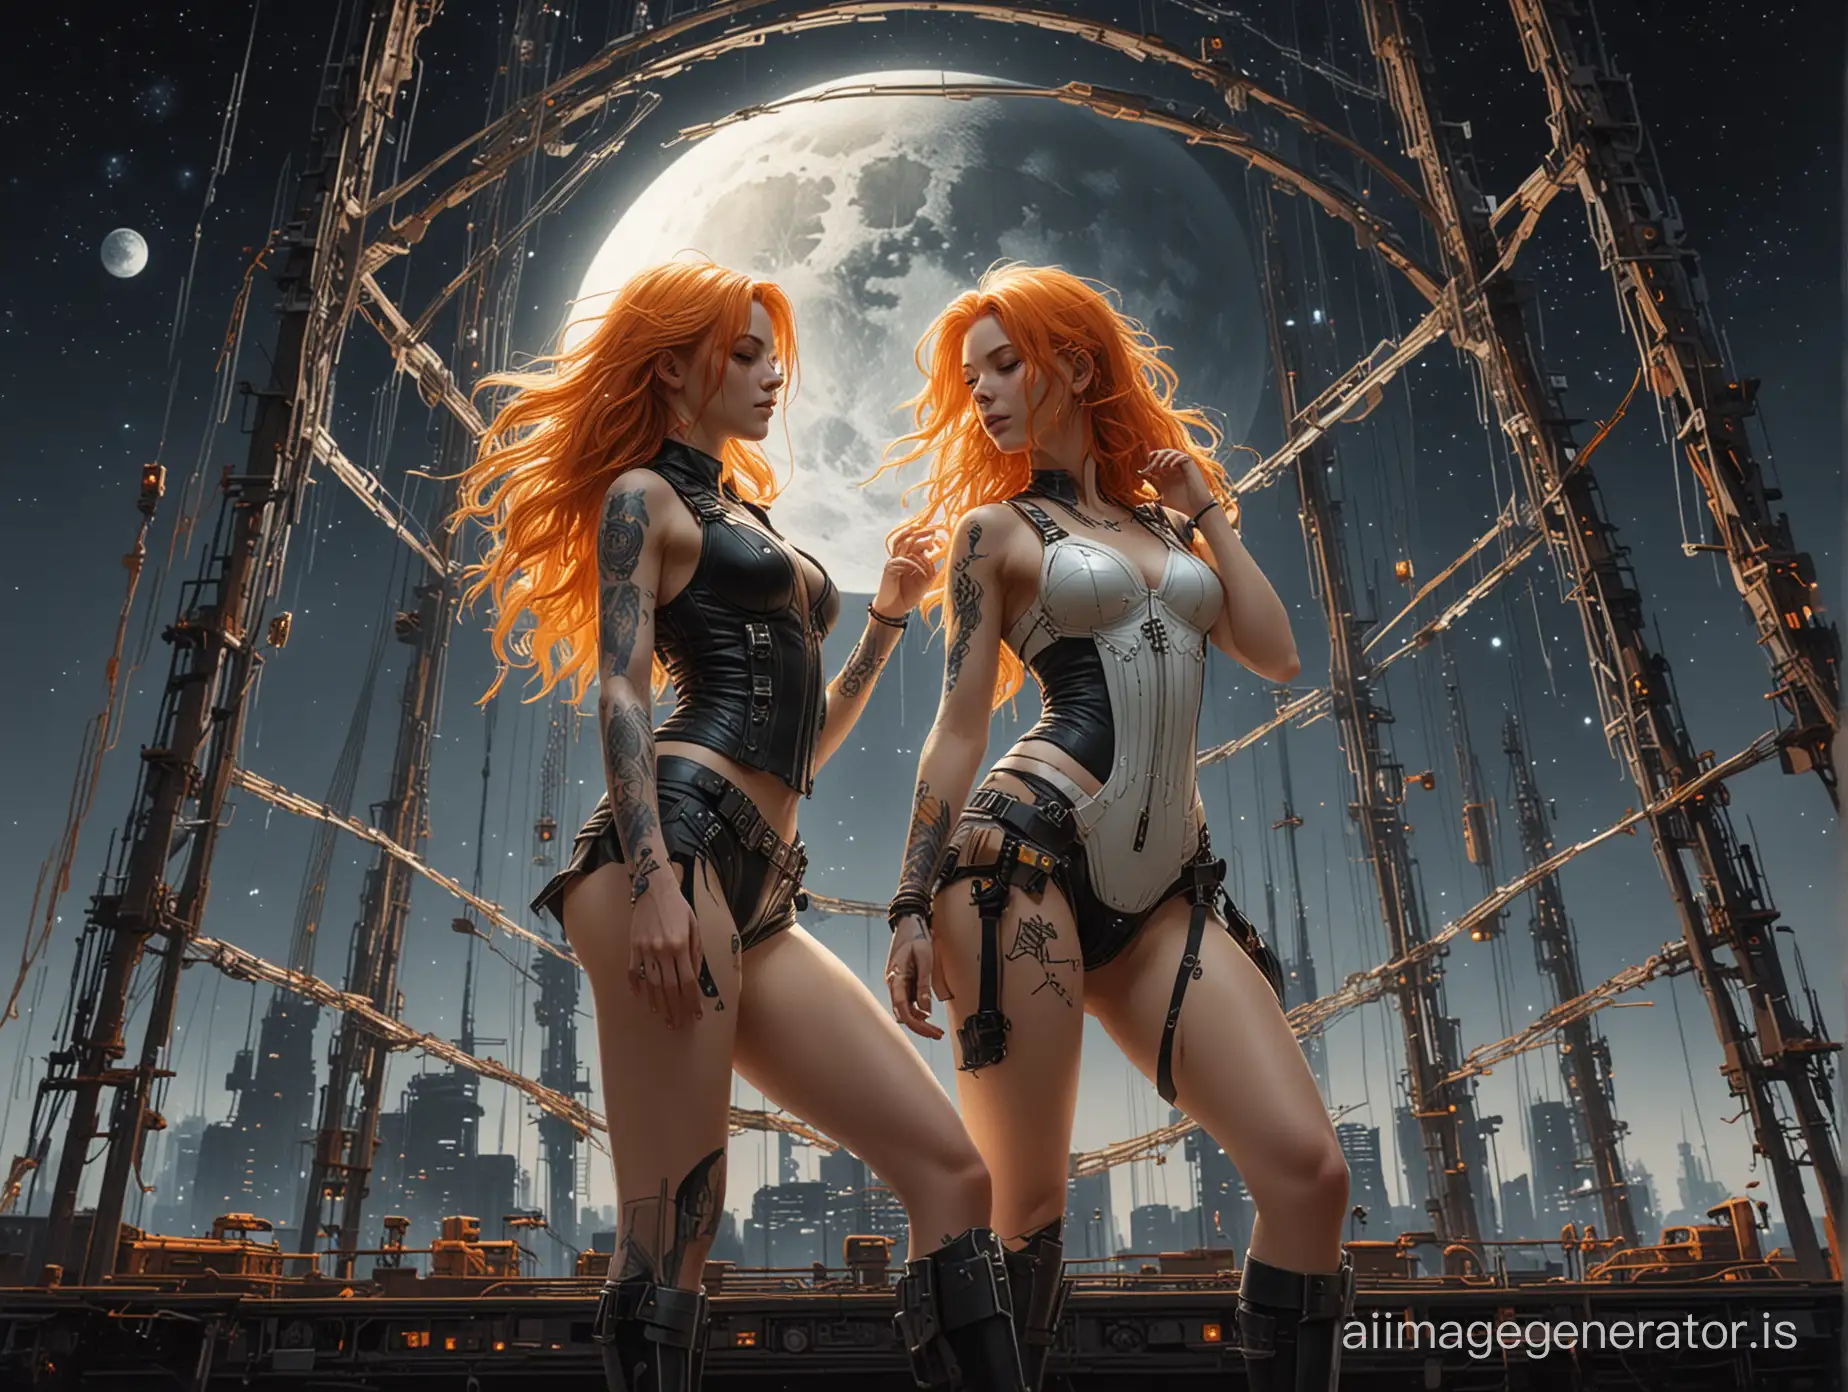 Dancing-OrangeHaired-Girls-on-Futuristic-Megastructures-under-a-Starry-Cosmos